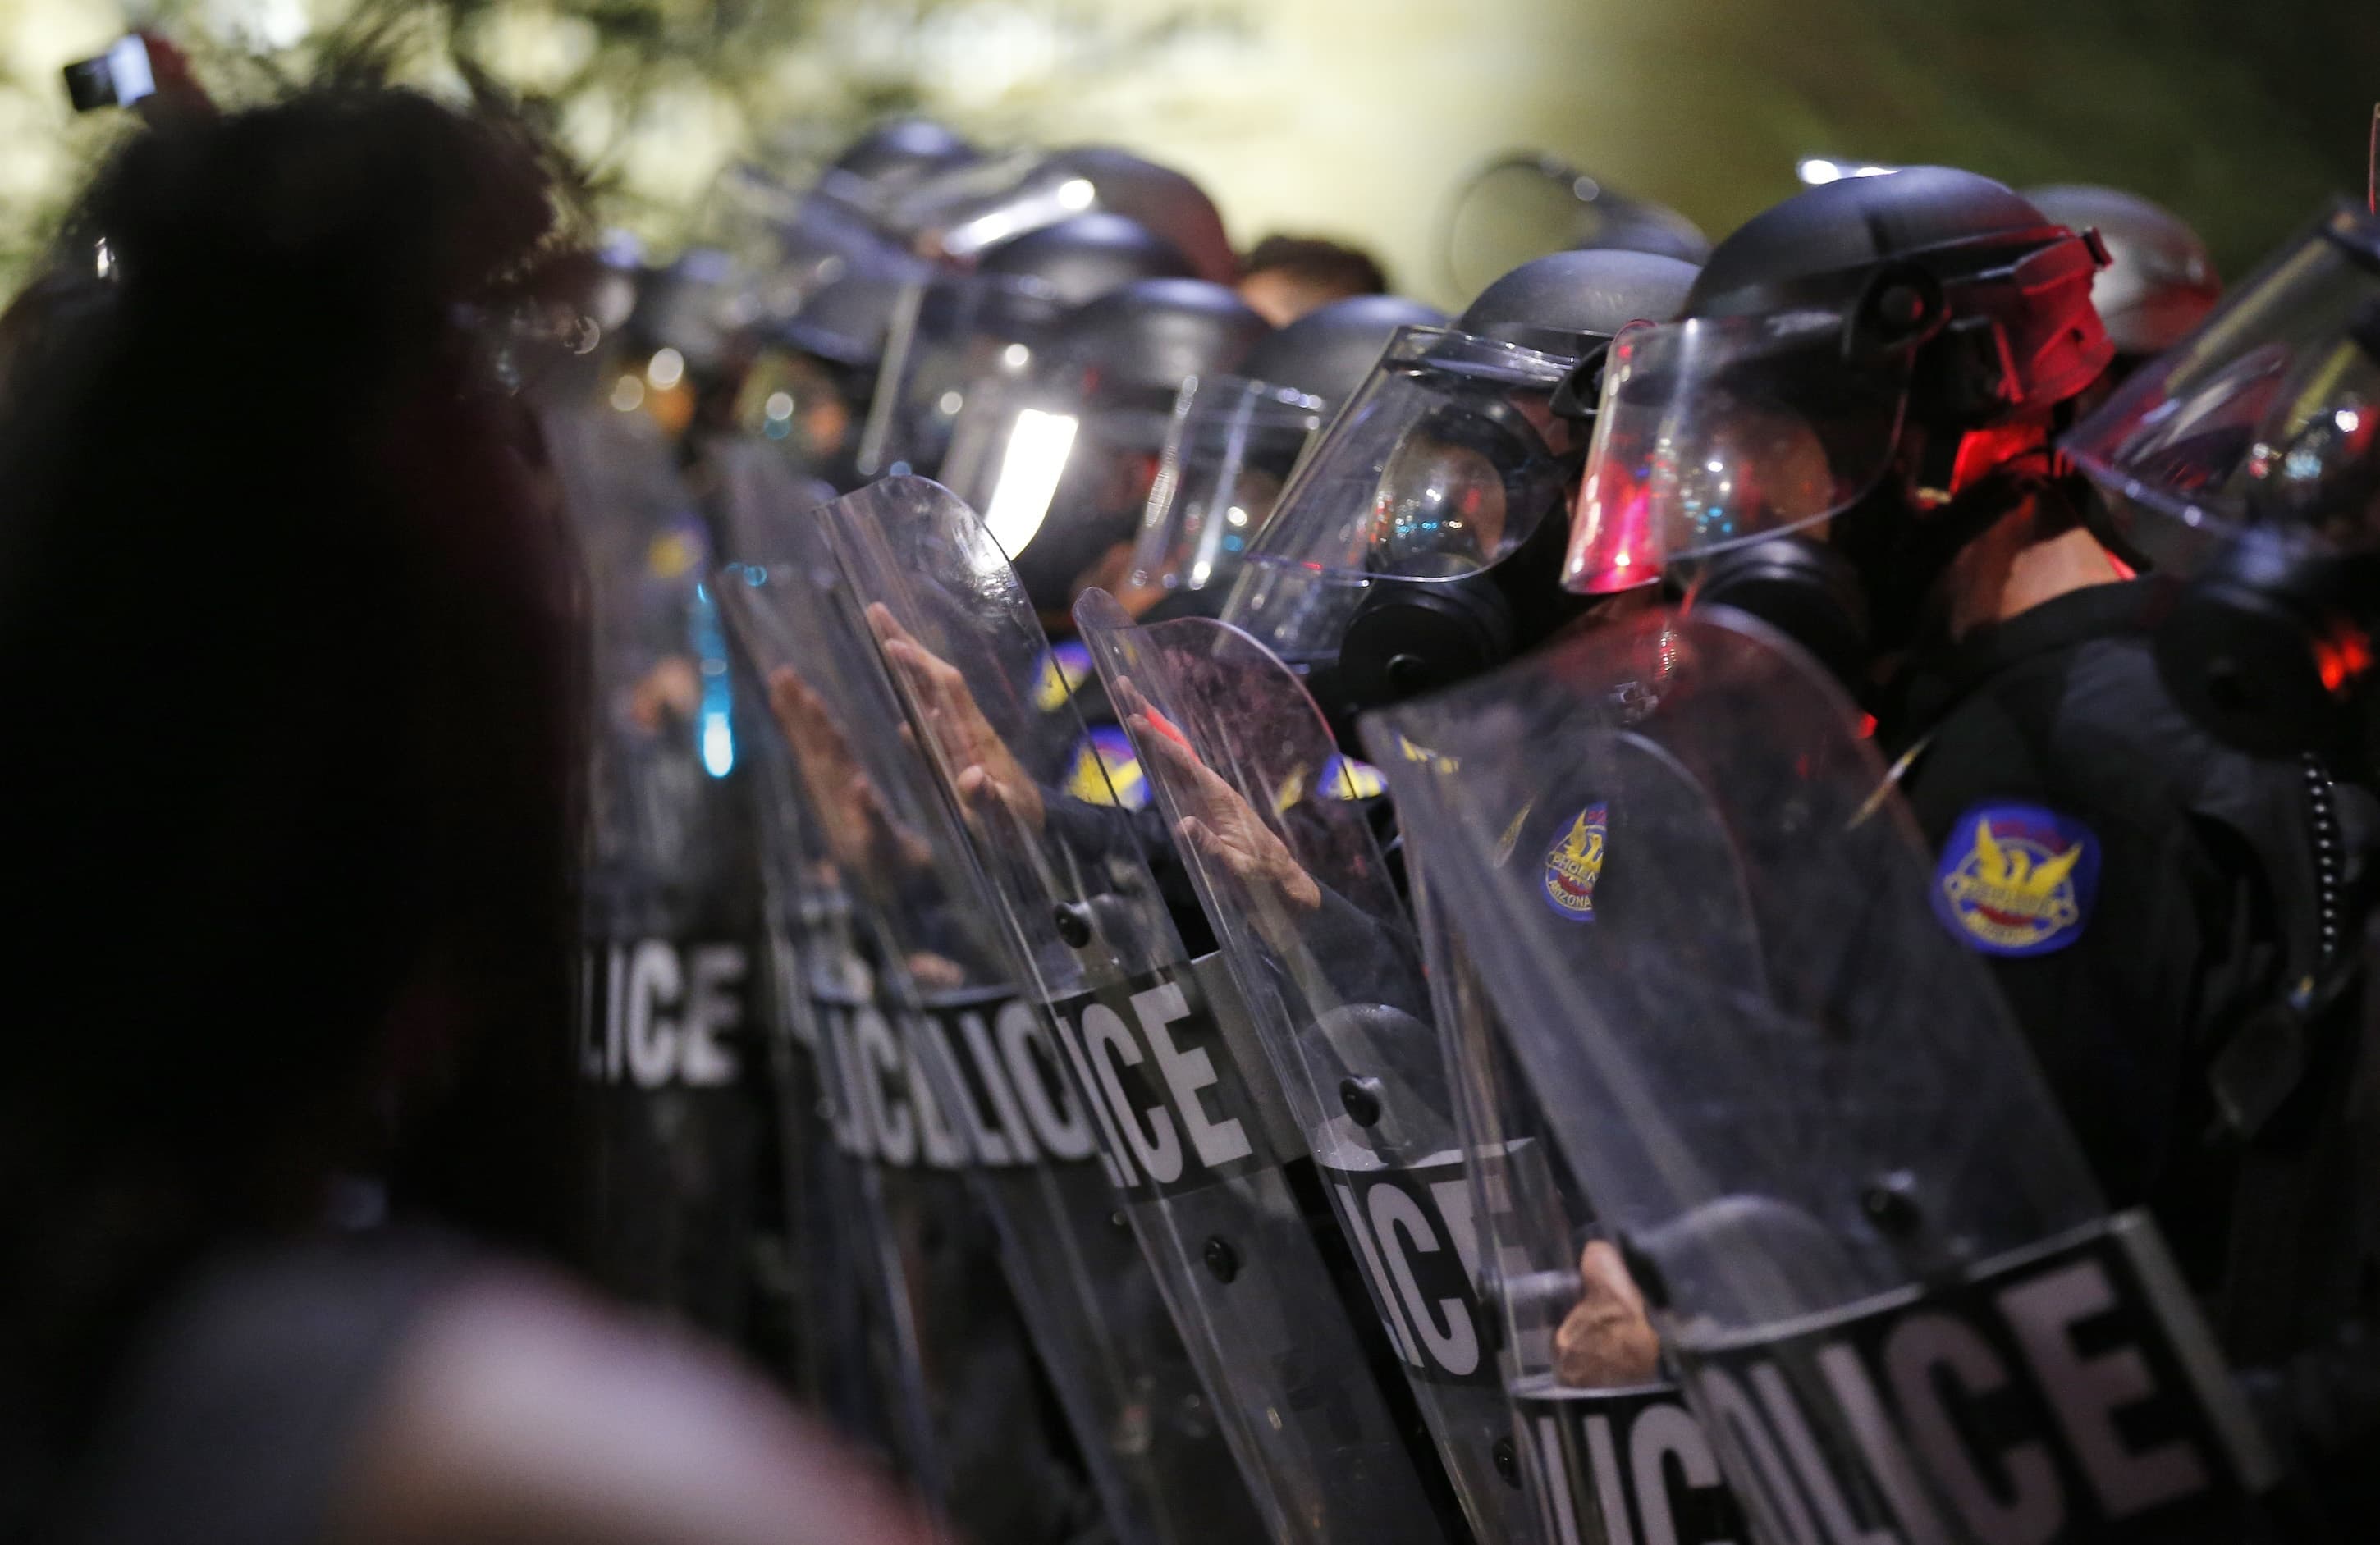 Police in riot gear block a street as hundreds of marchers take to the streets to protest against the recent fatal shootings of black men by police July 8, 2016, AP Photo/Ross D. Franklin